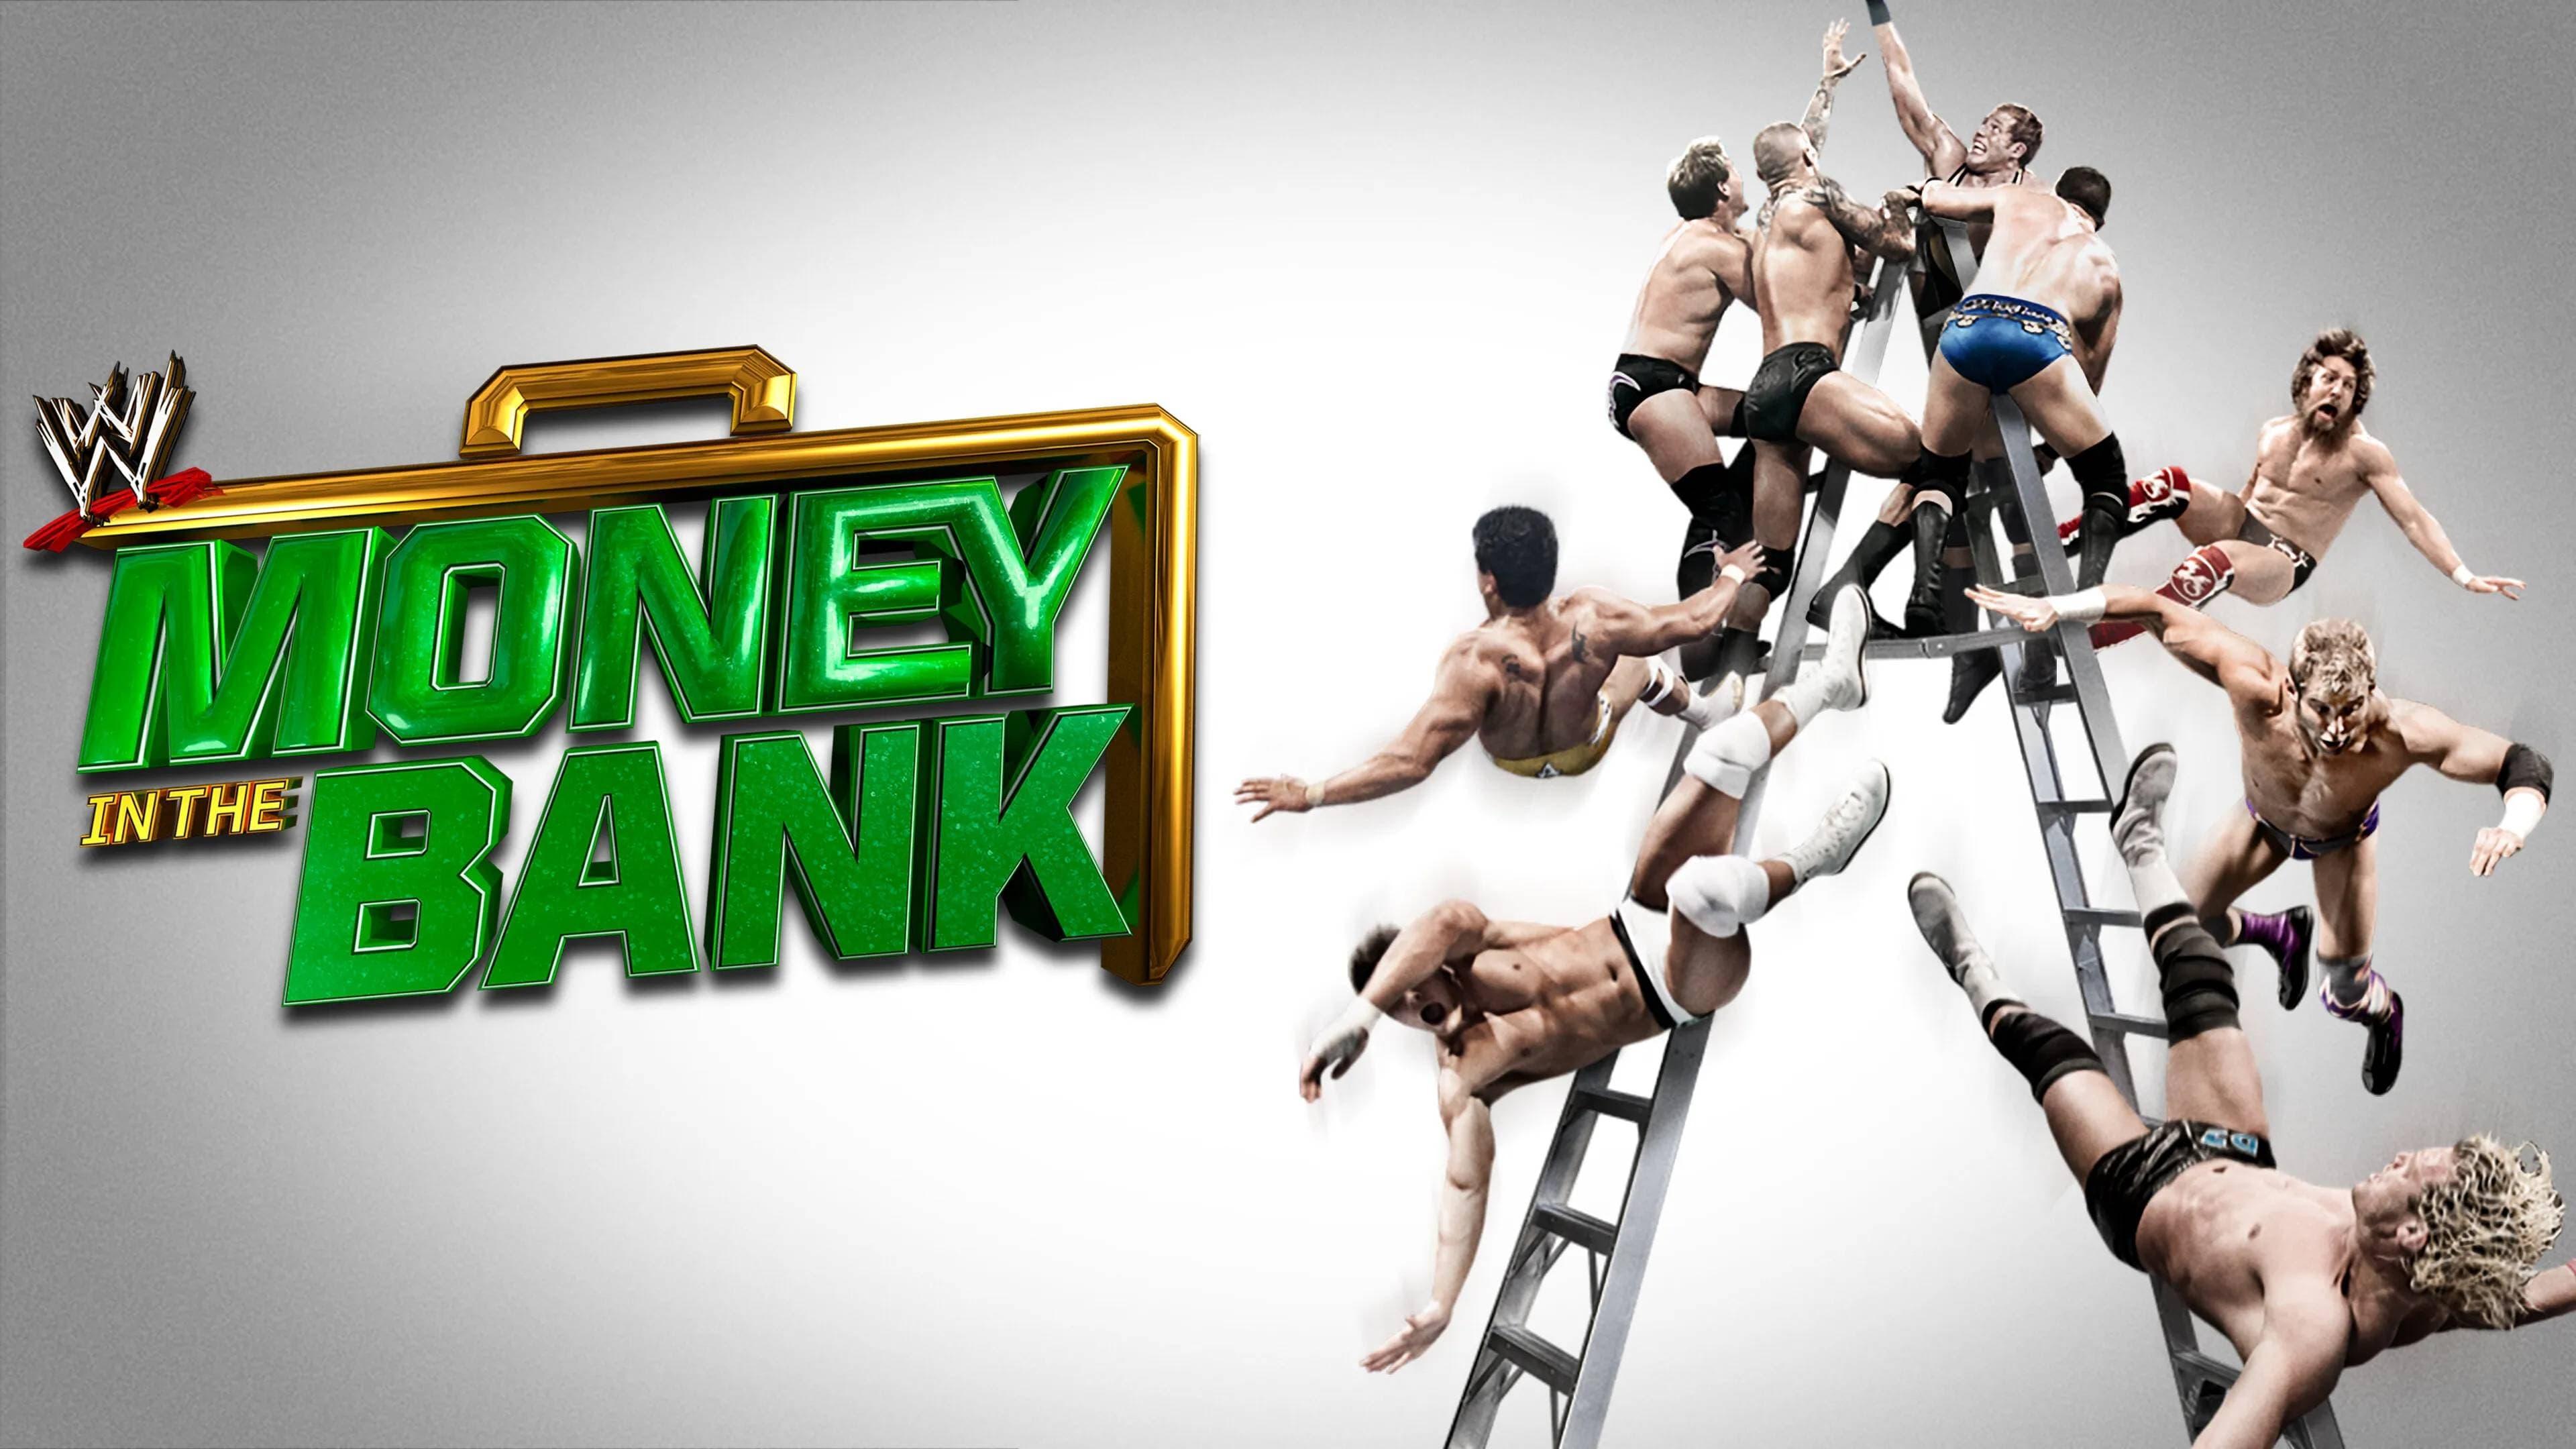 WWE Money in the Bank 2013 backdrop